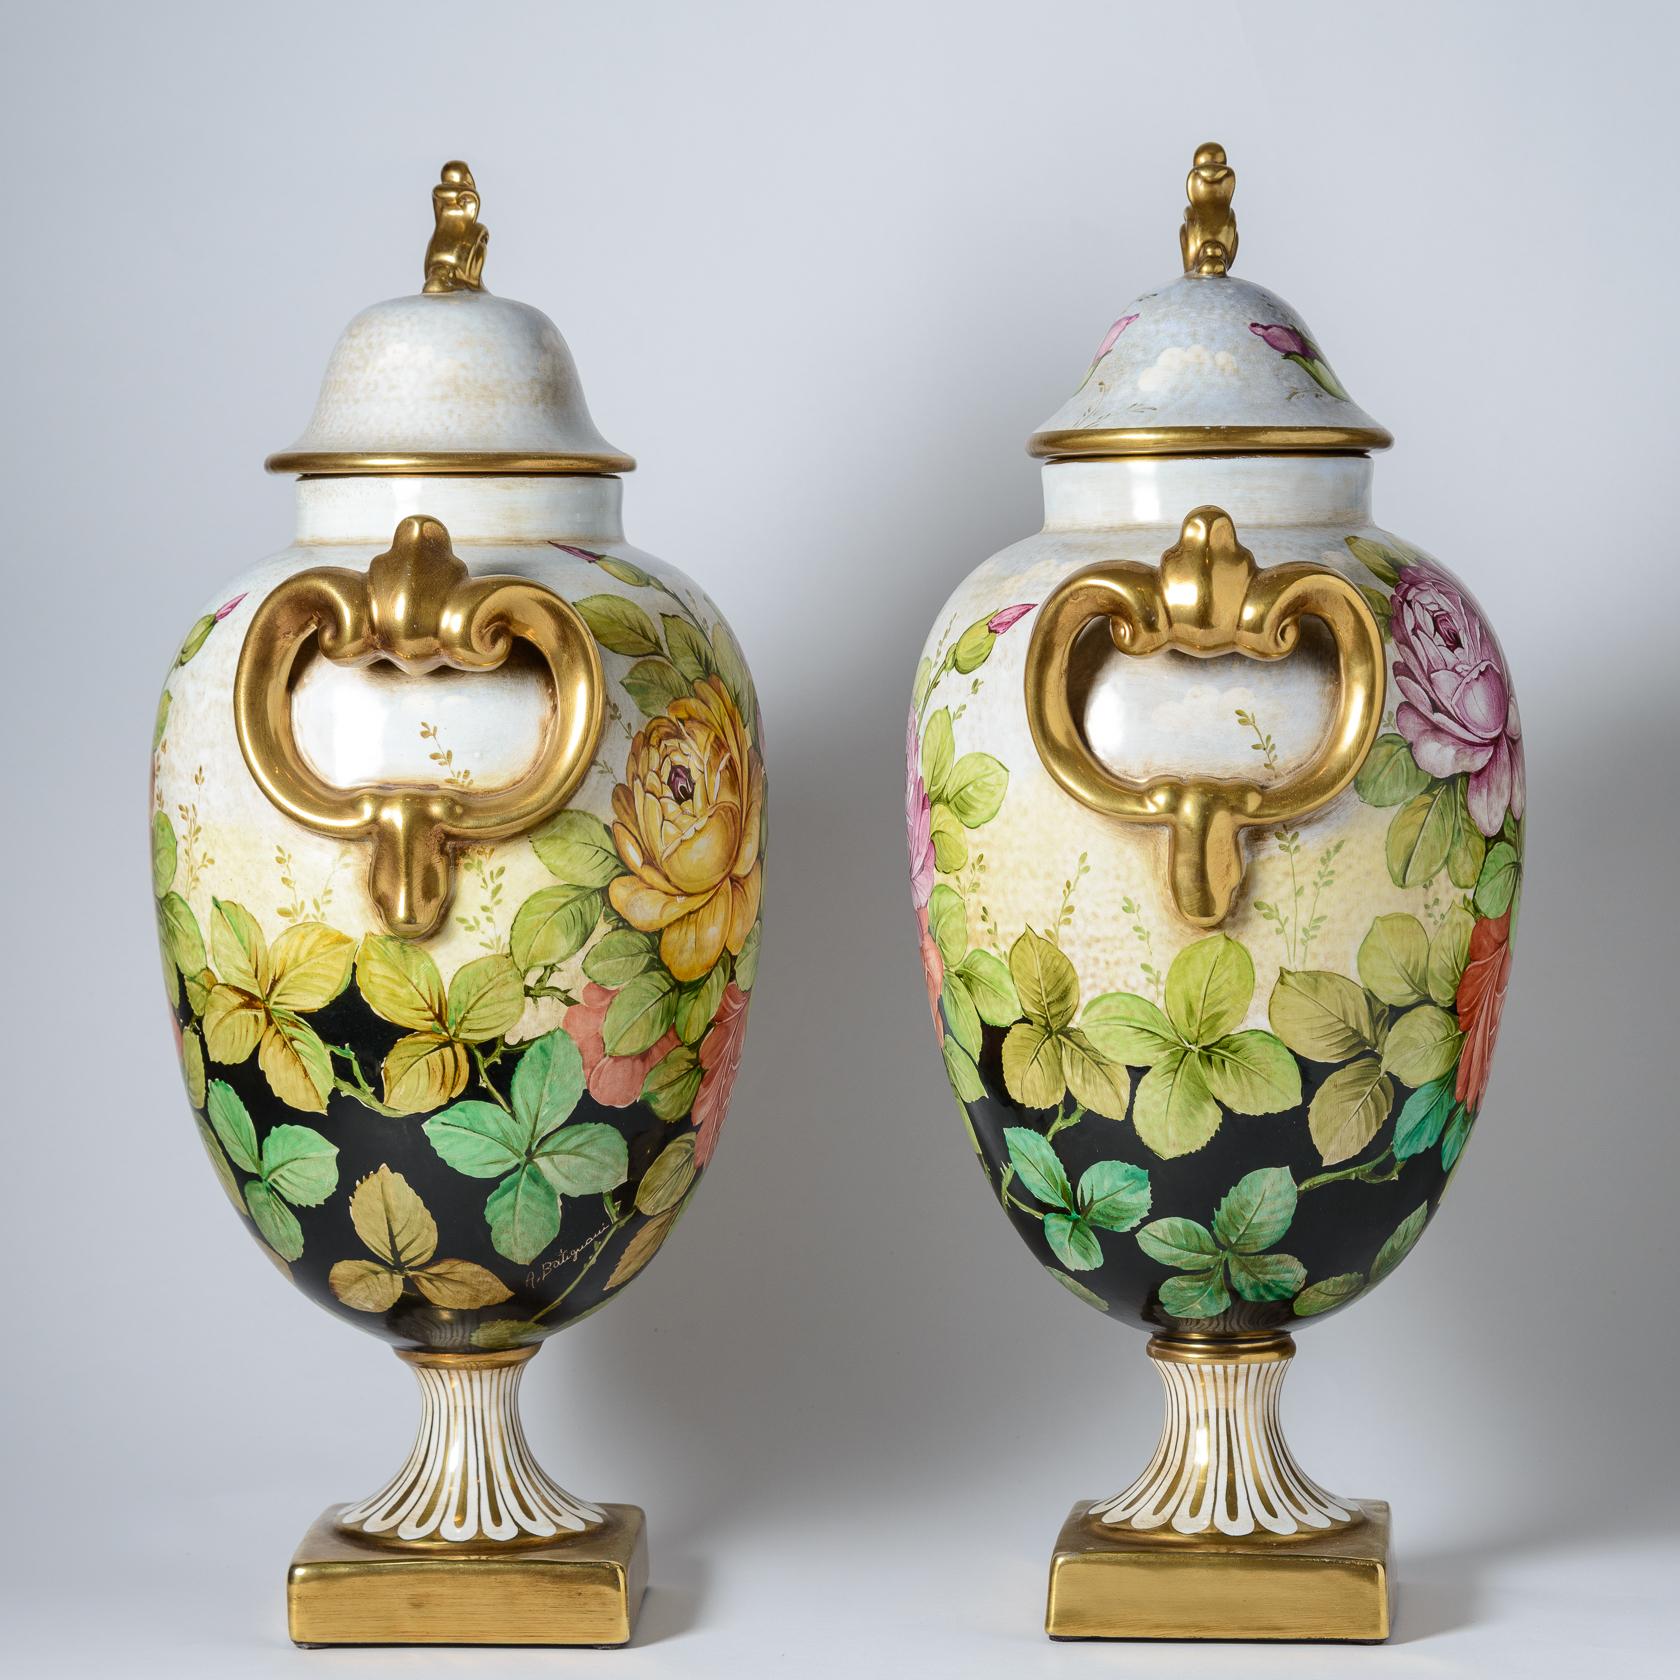 A pair of tall vibrant Italian vases with beautiful covers and unique finials with multi color roses. This pair also features traditional gilt striped bases. Artist signed and with so much detail in the paintings. From a limited edition of 100 only.